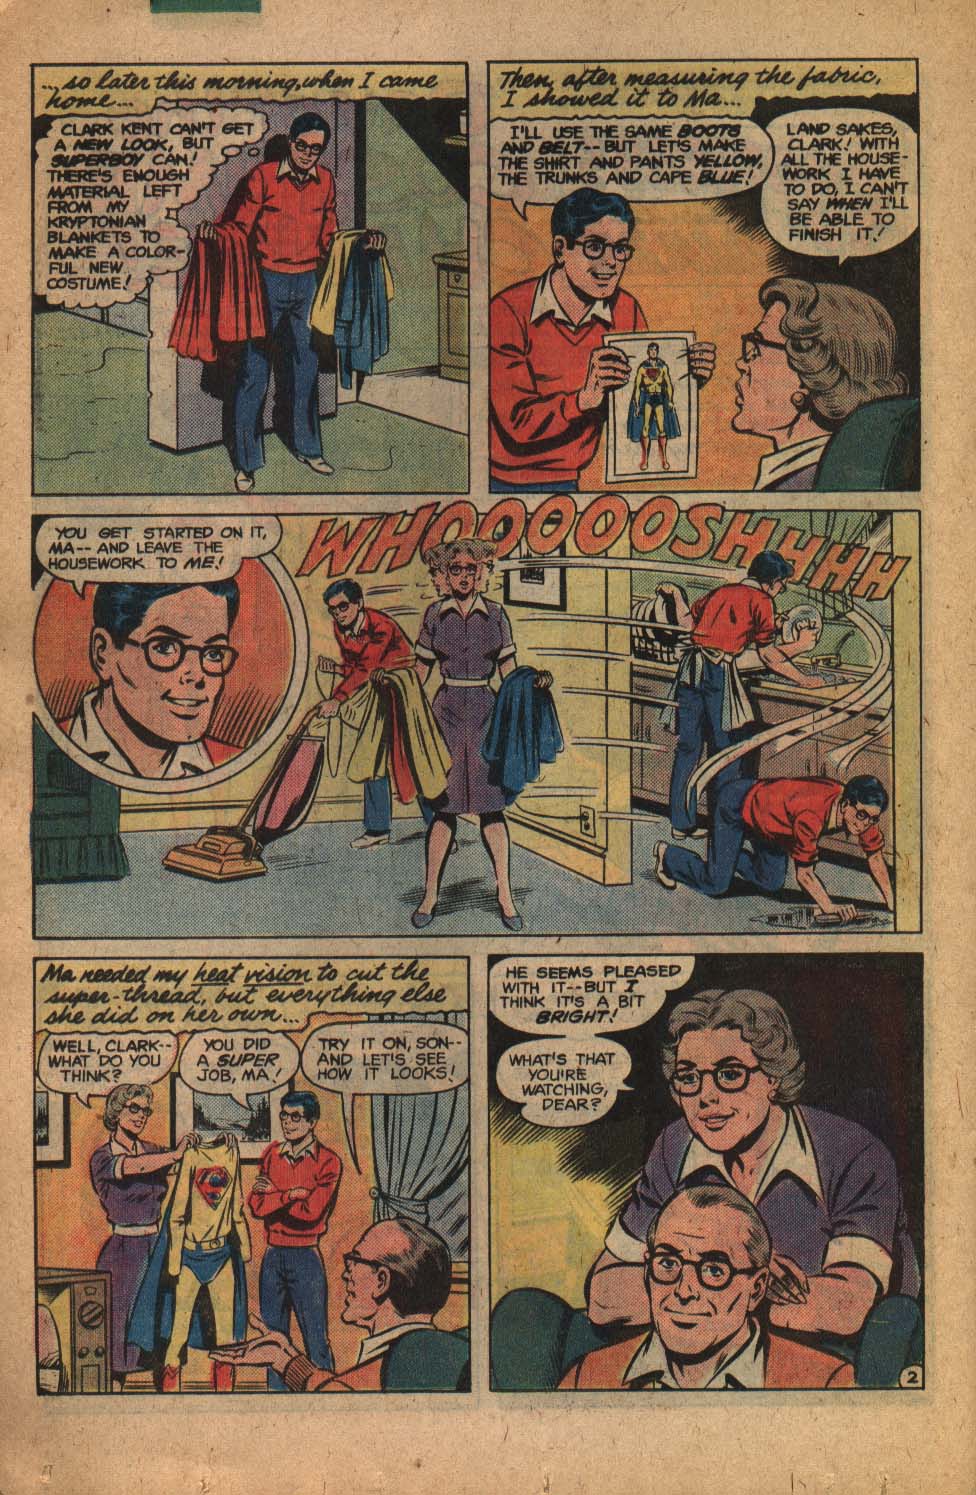 The New Adventures of Superboy 18 Page 25